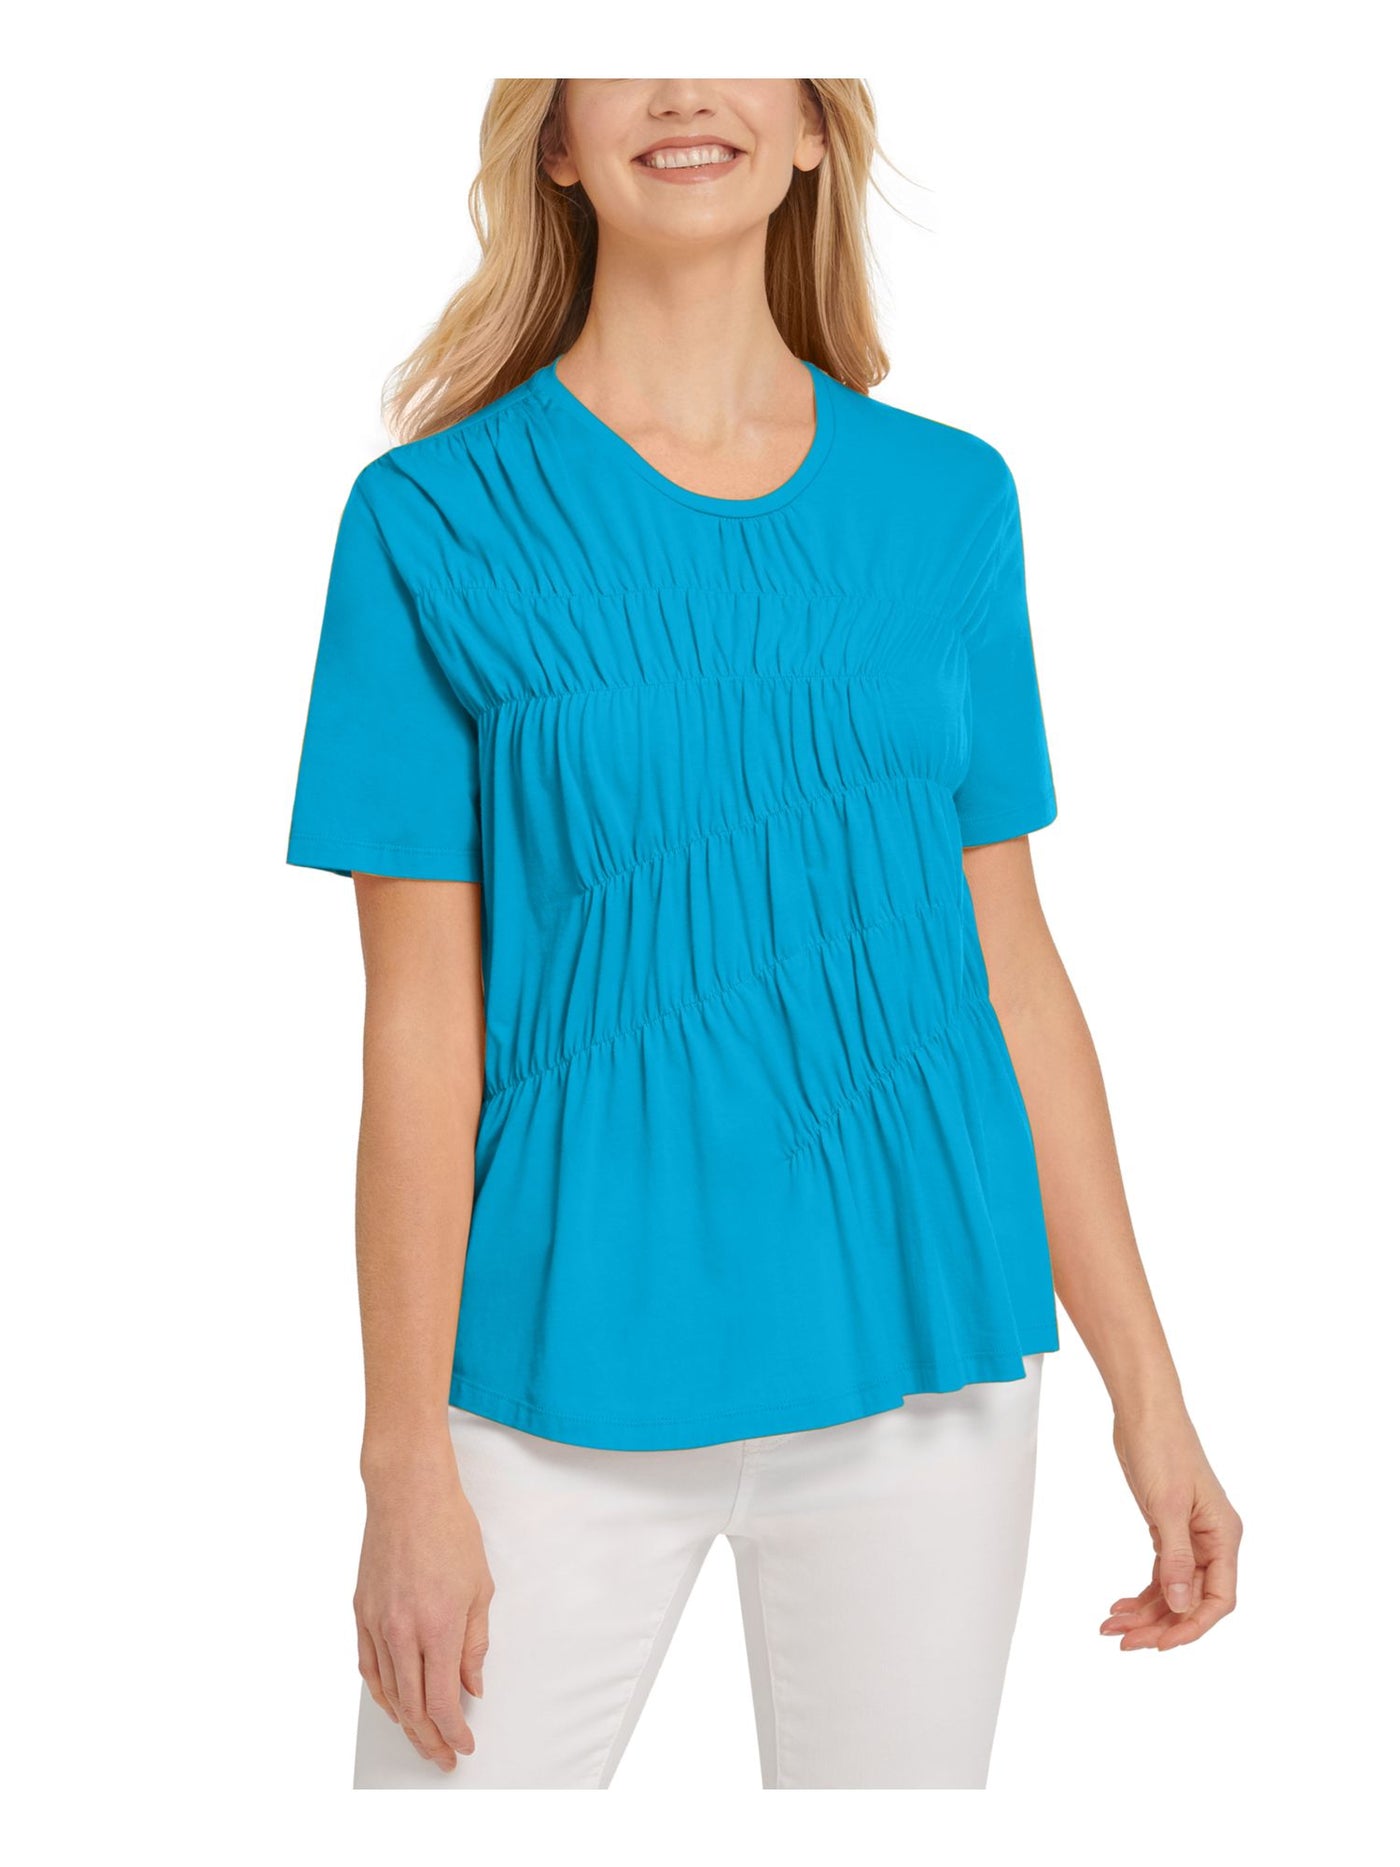 DKNY Womens Teal Ruched Short Sleeve Crew Neck Top XL